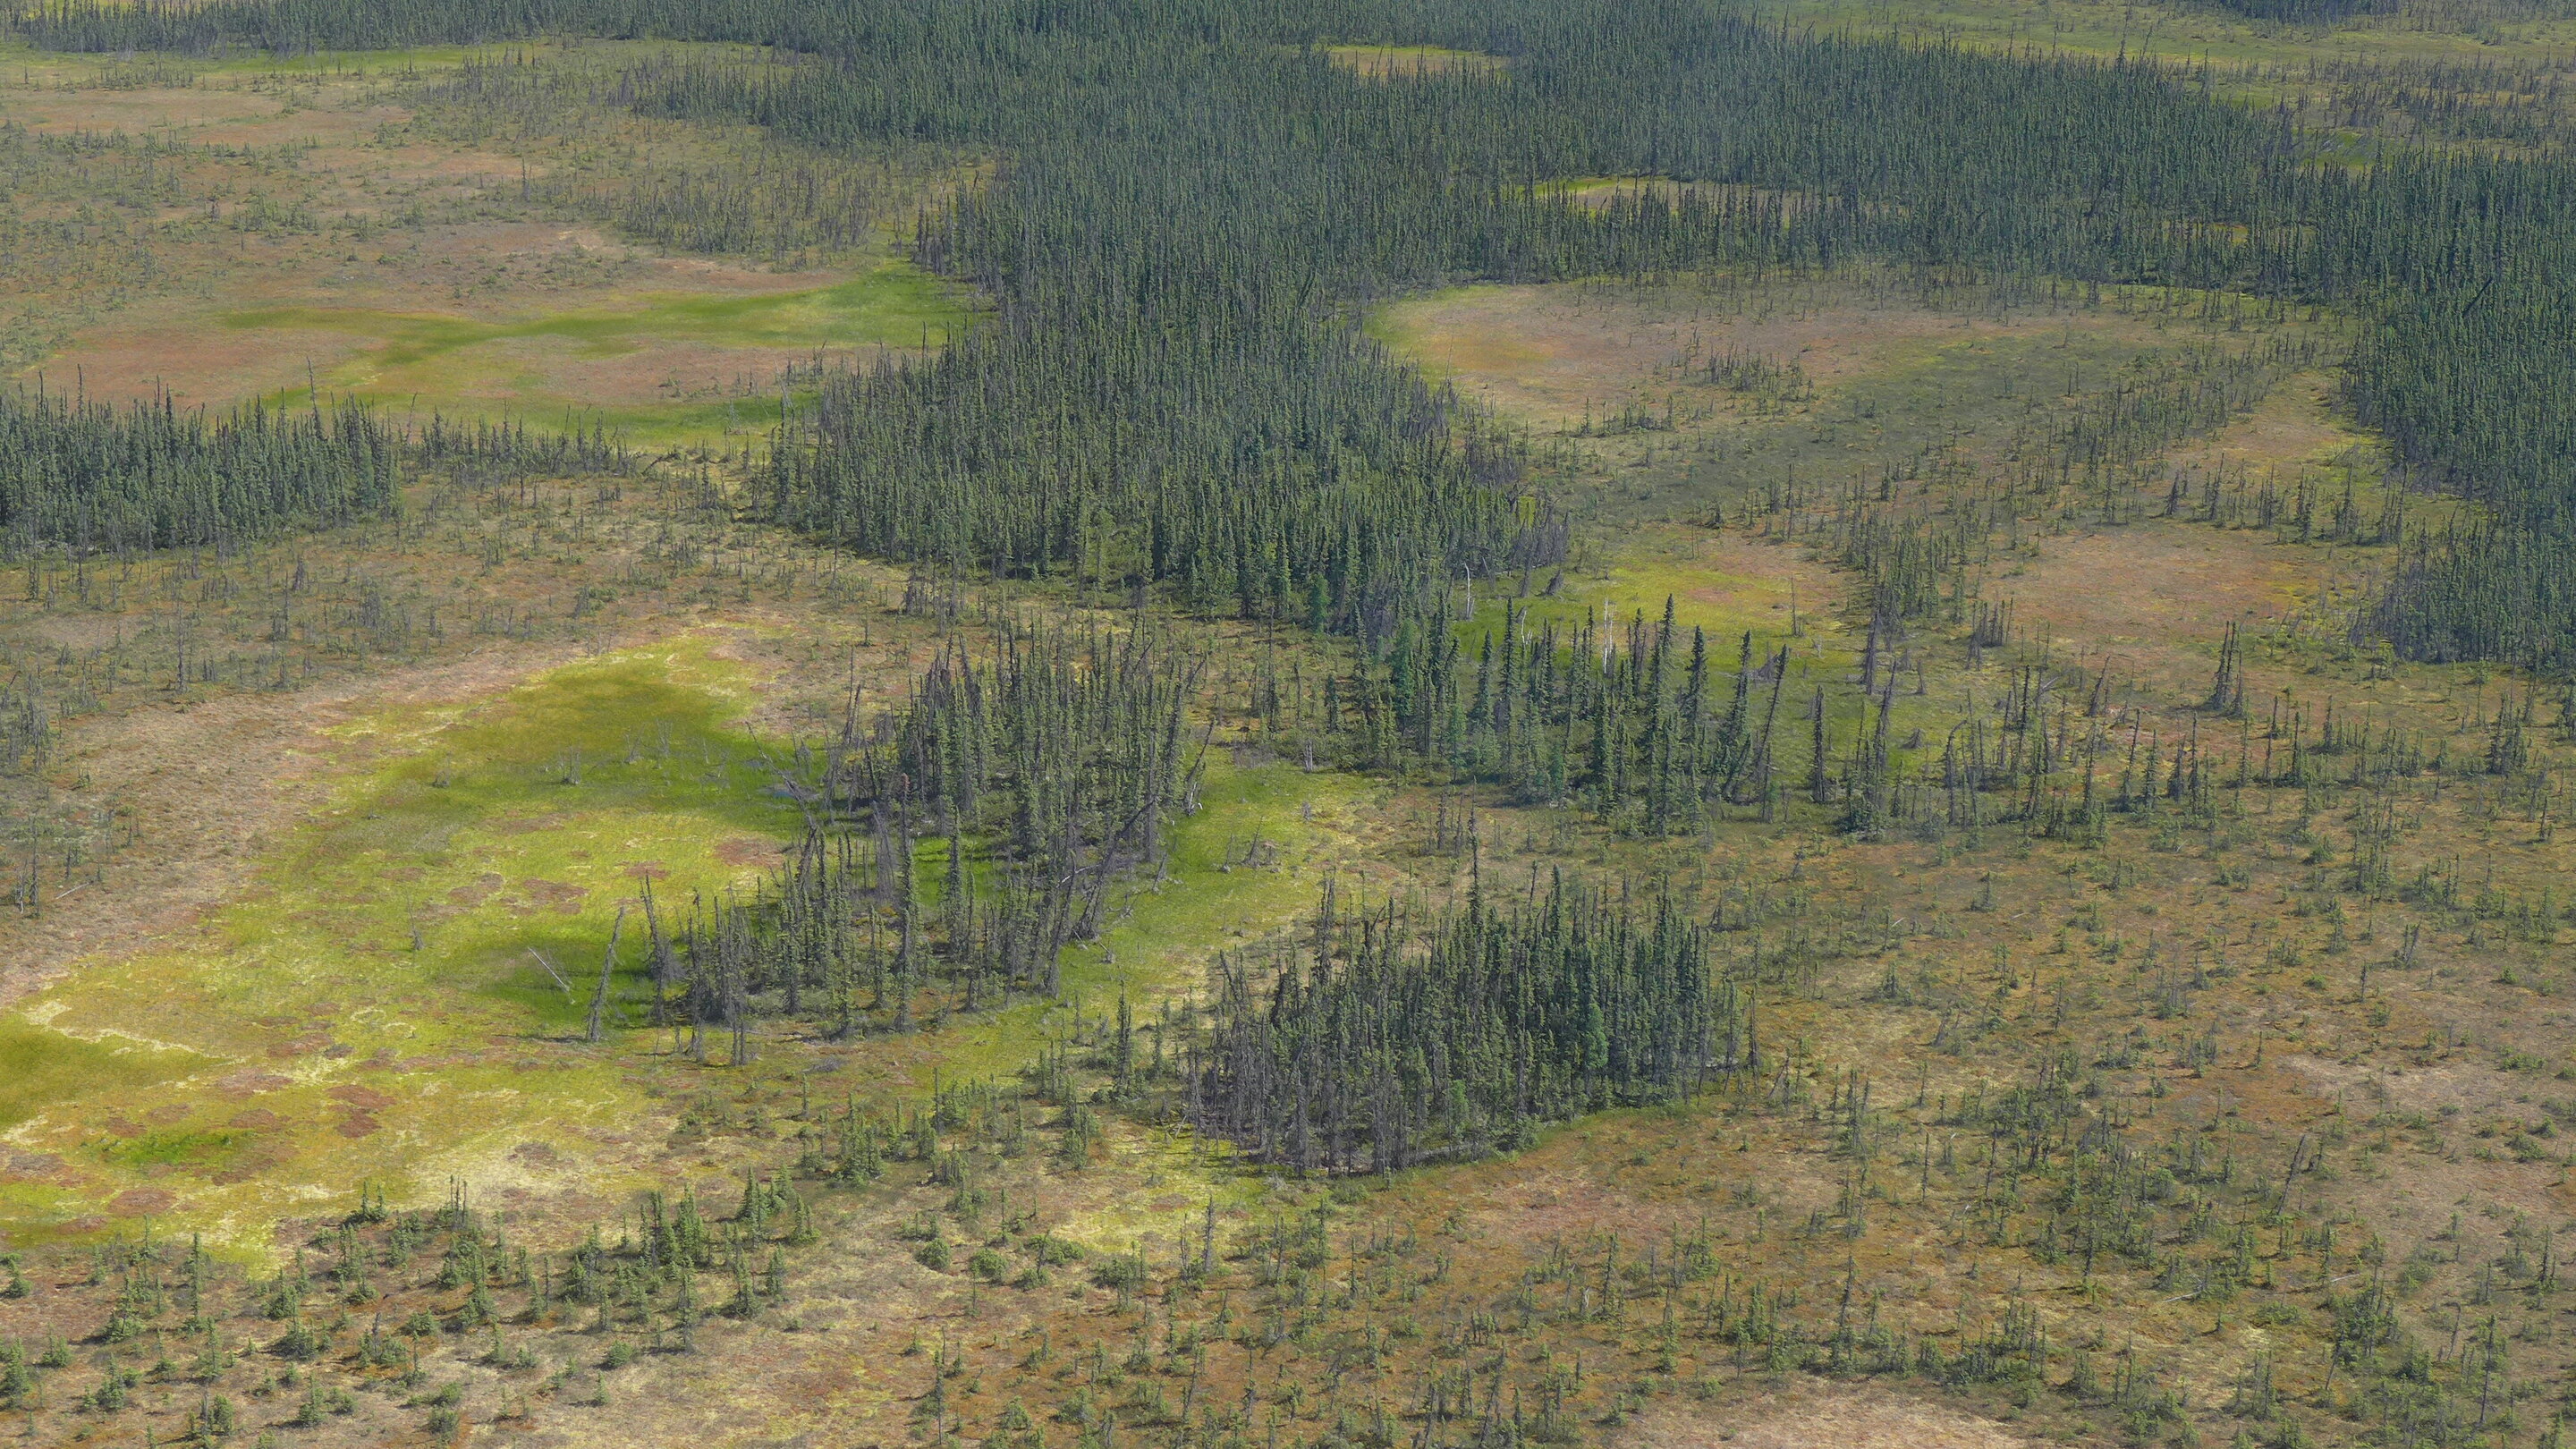 Water loss in northern peatlands threatens to intensify fires, global warming - Phys.org